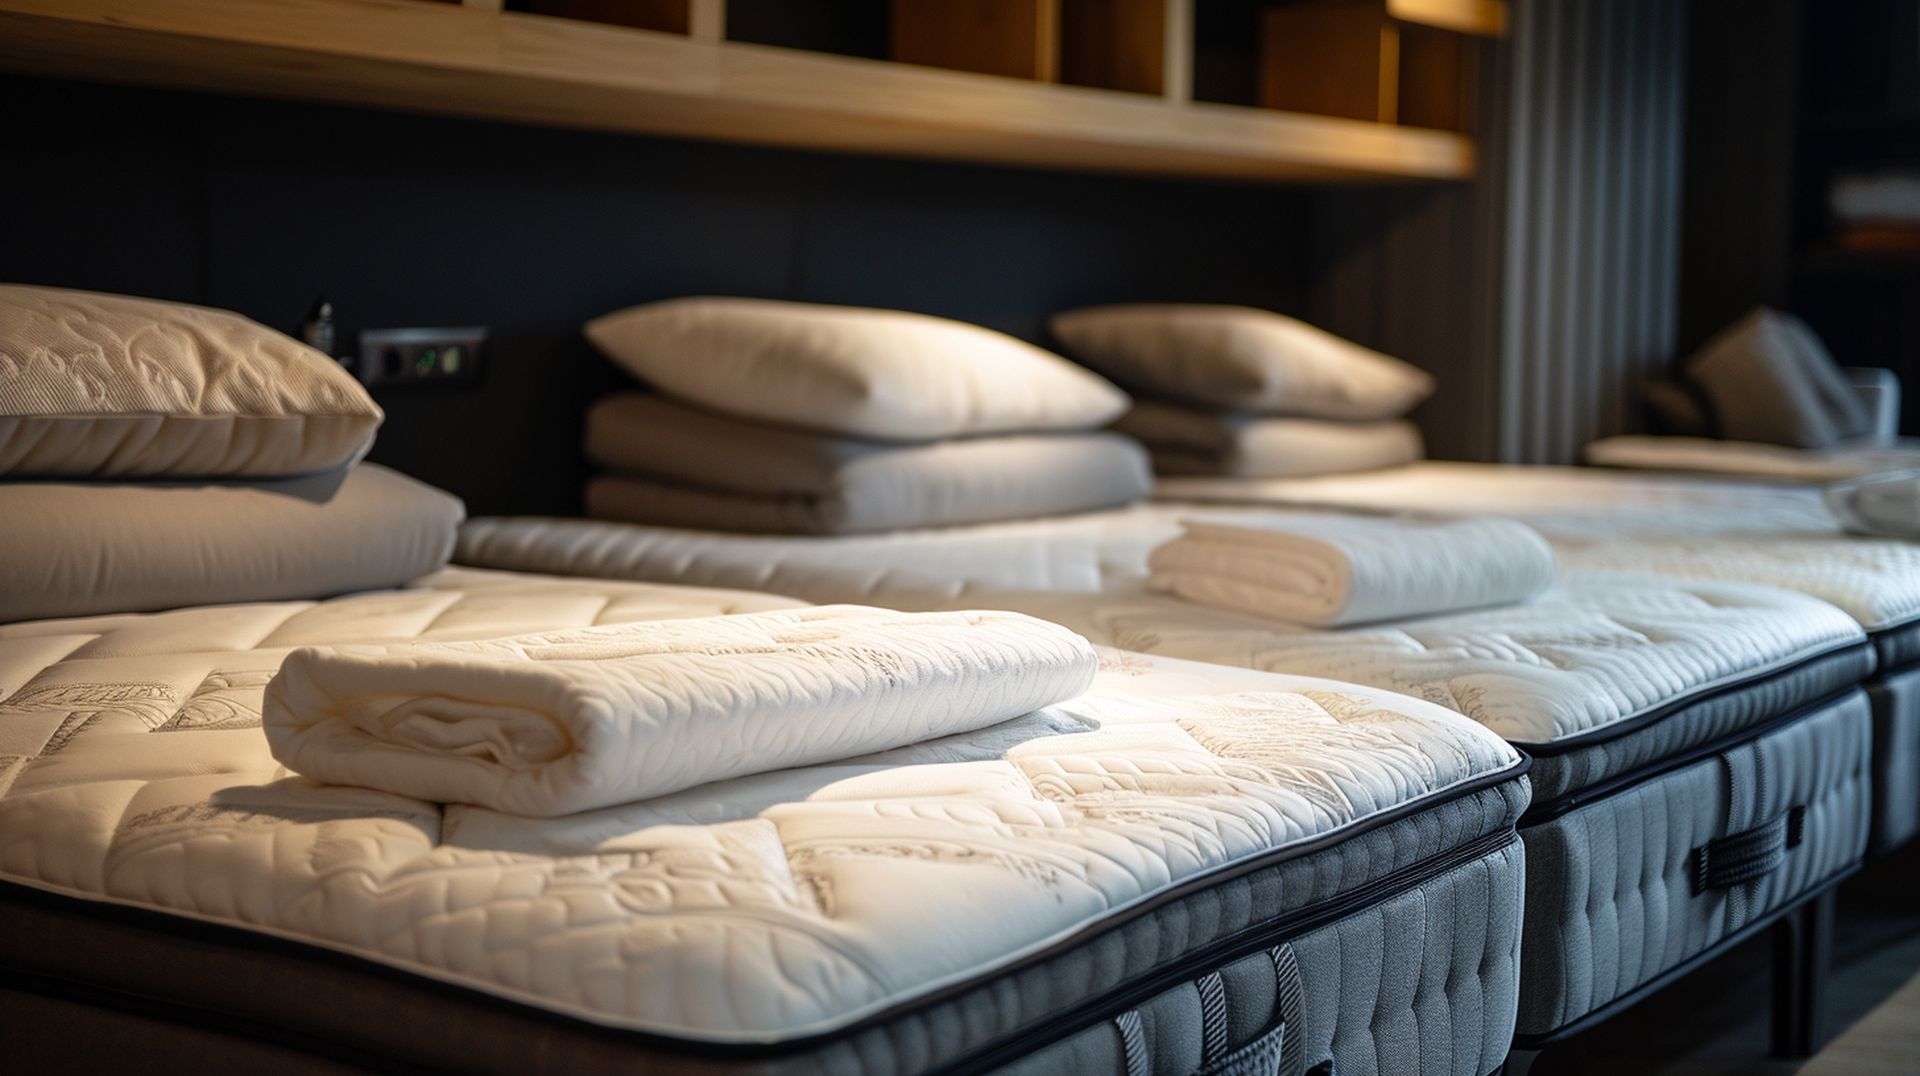 If you're looking for a new bed, mattress stores in Monroe offer the best customer and delivery service, financing, and warranties in Louisiana